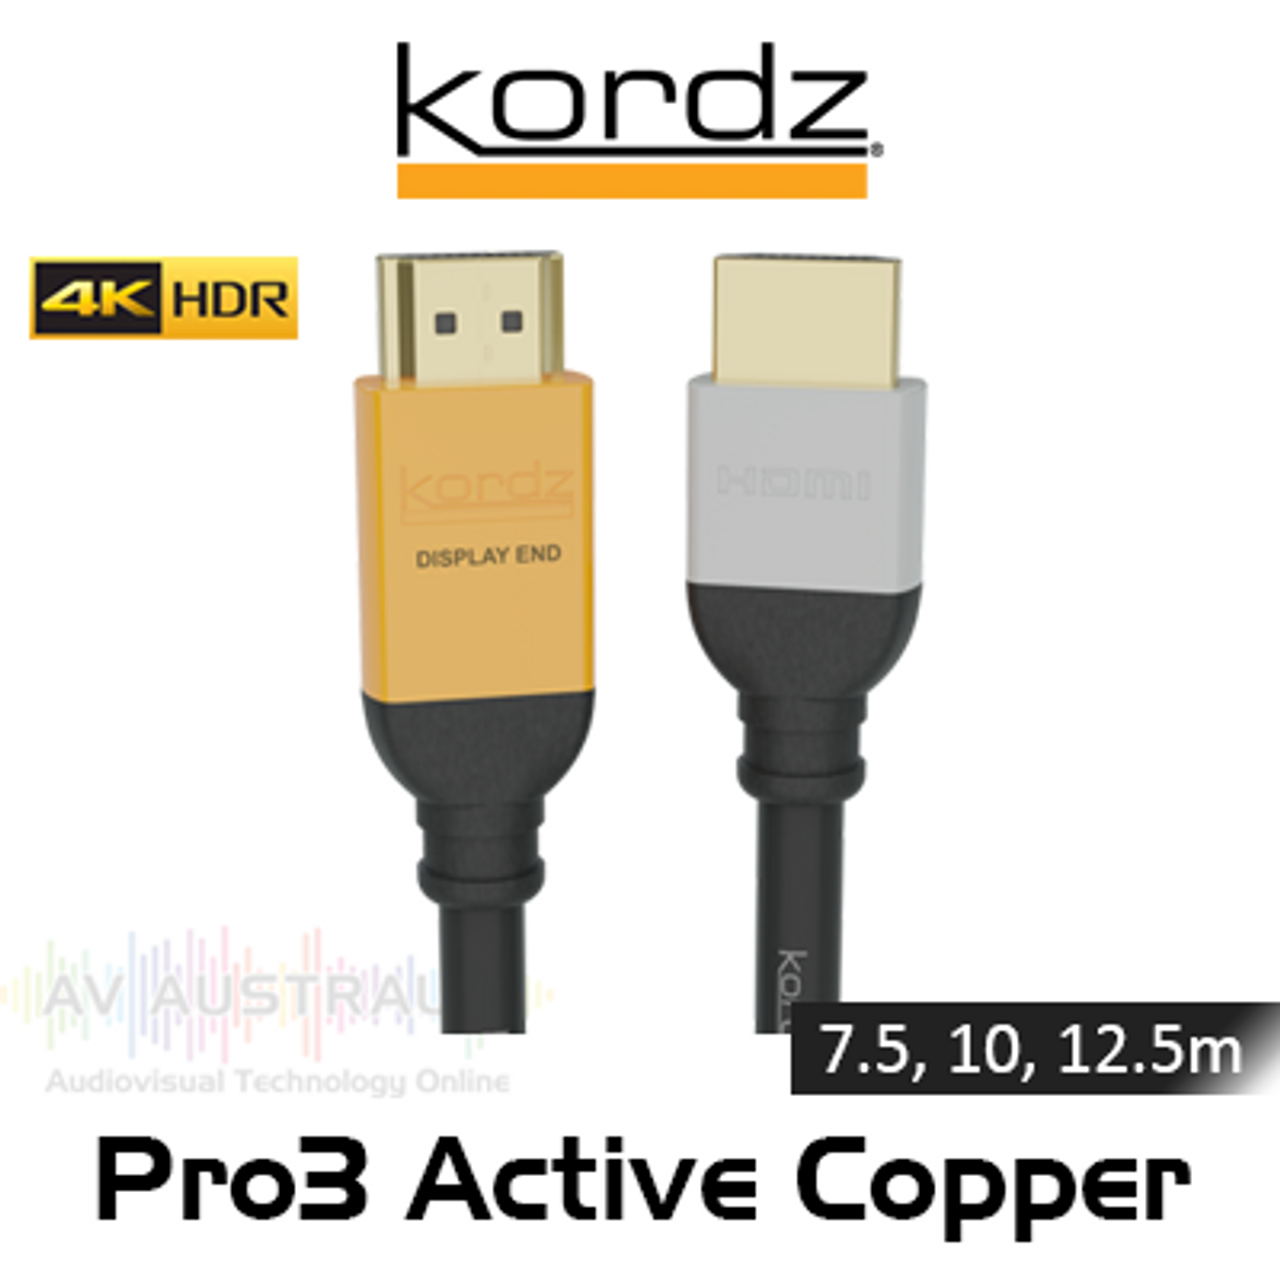 Kordz Pro3 Series 4K60 HDR 18Gbps Active Copper HDMI Cables (7.5, 10, 12.5m)